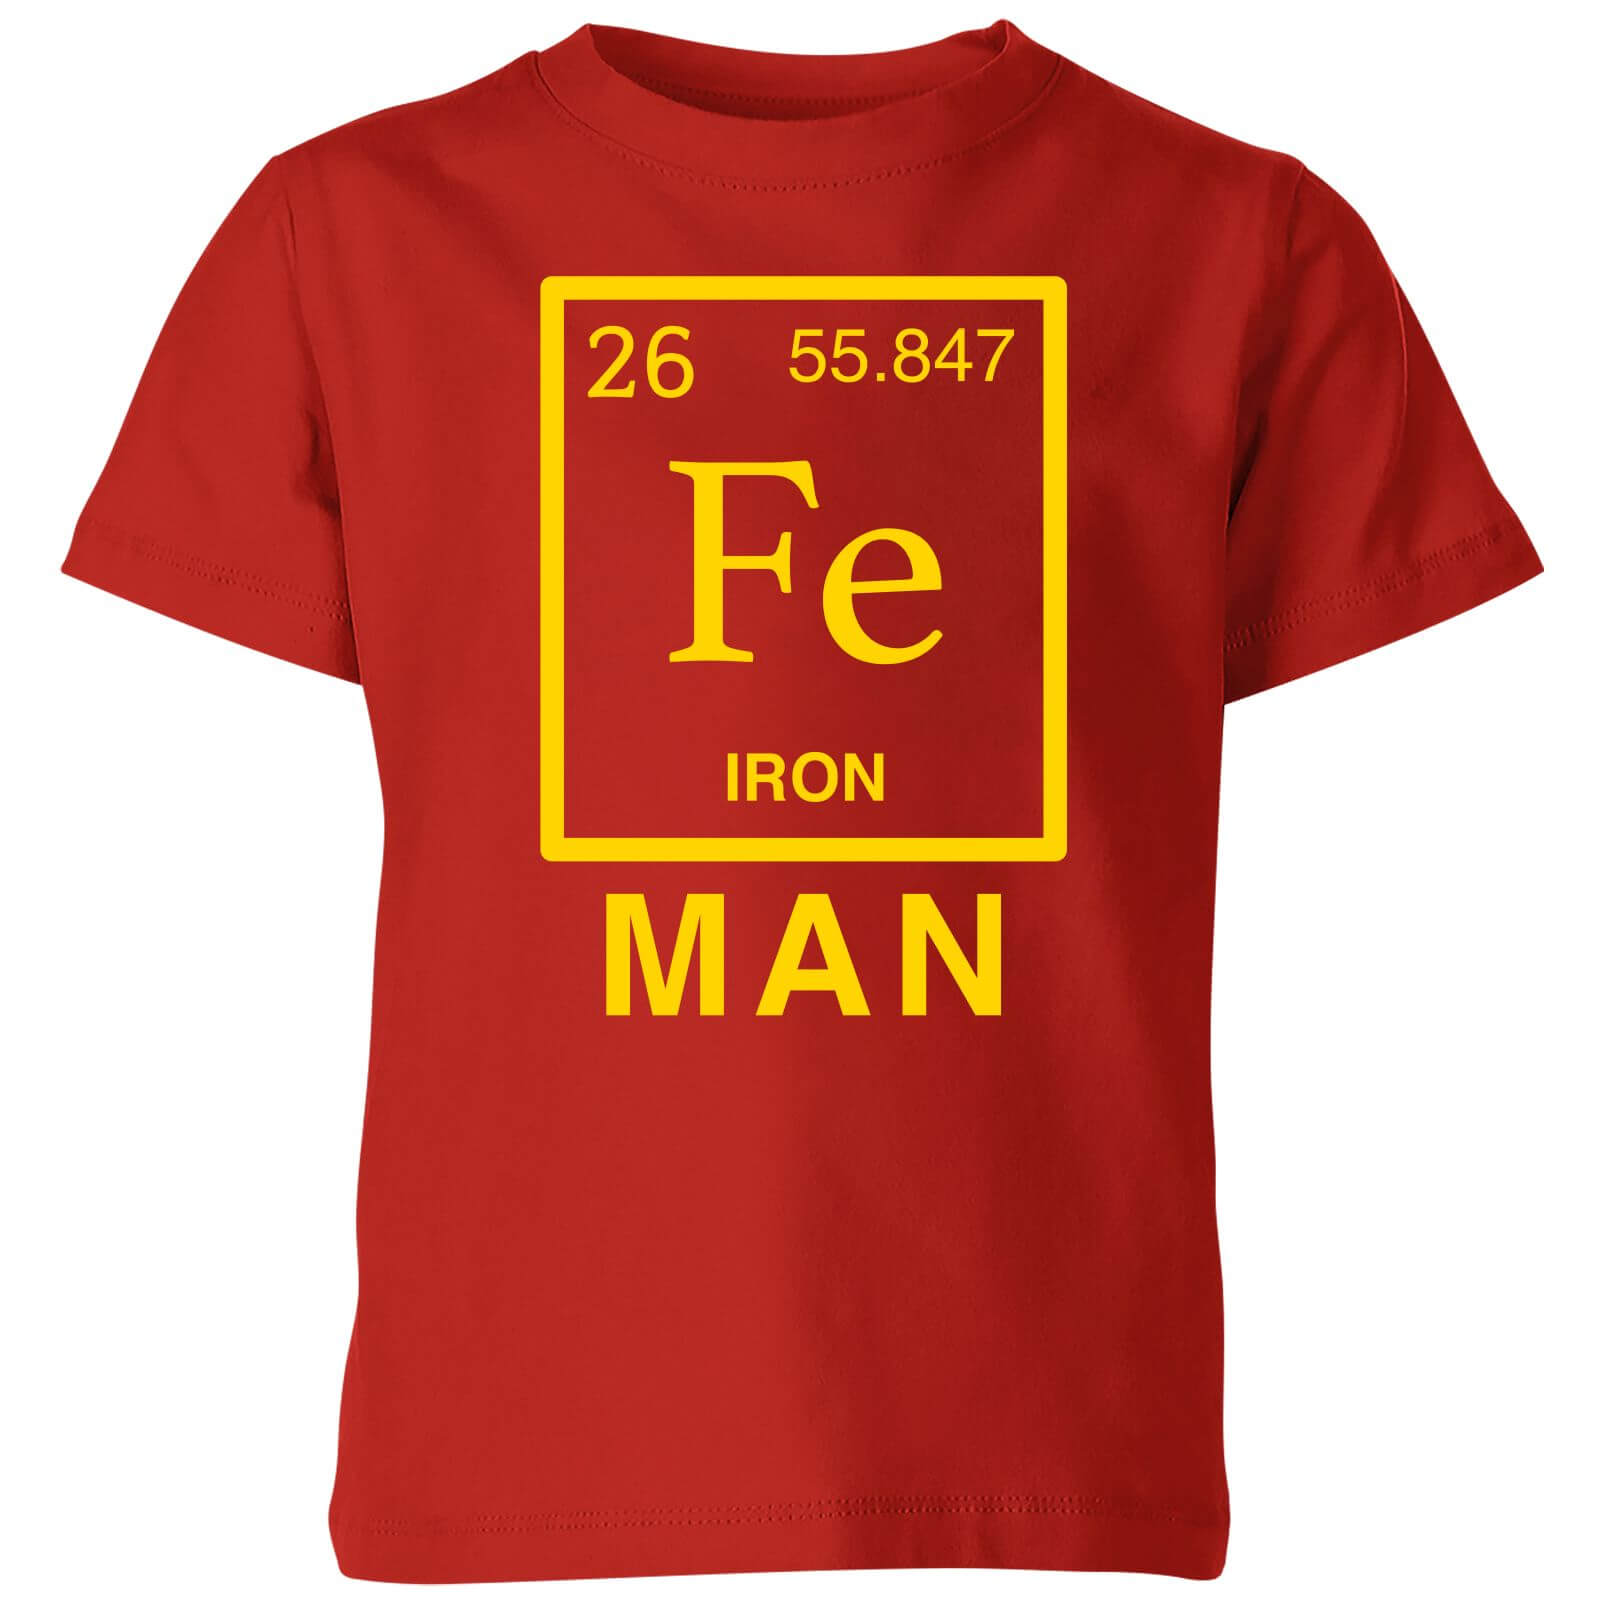 Fe Man Kids' T-Shirt - Red - 9-10 Years - Red